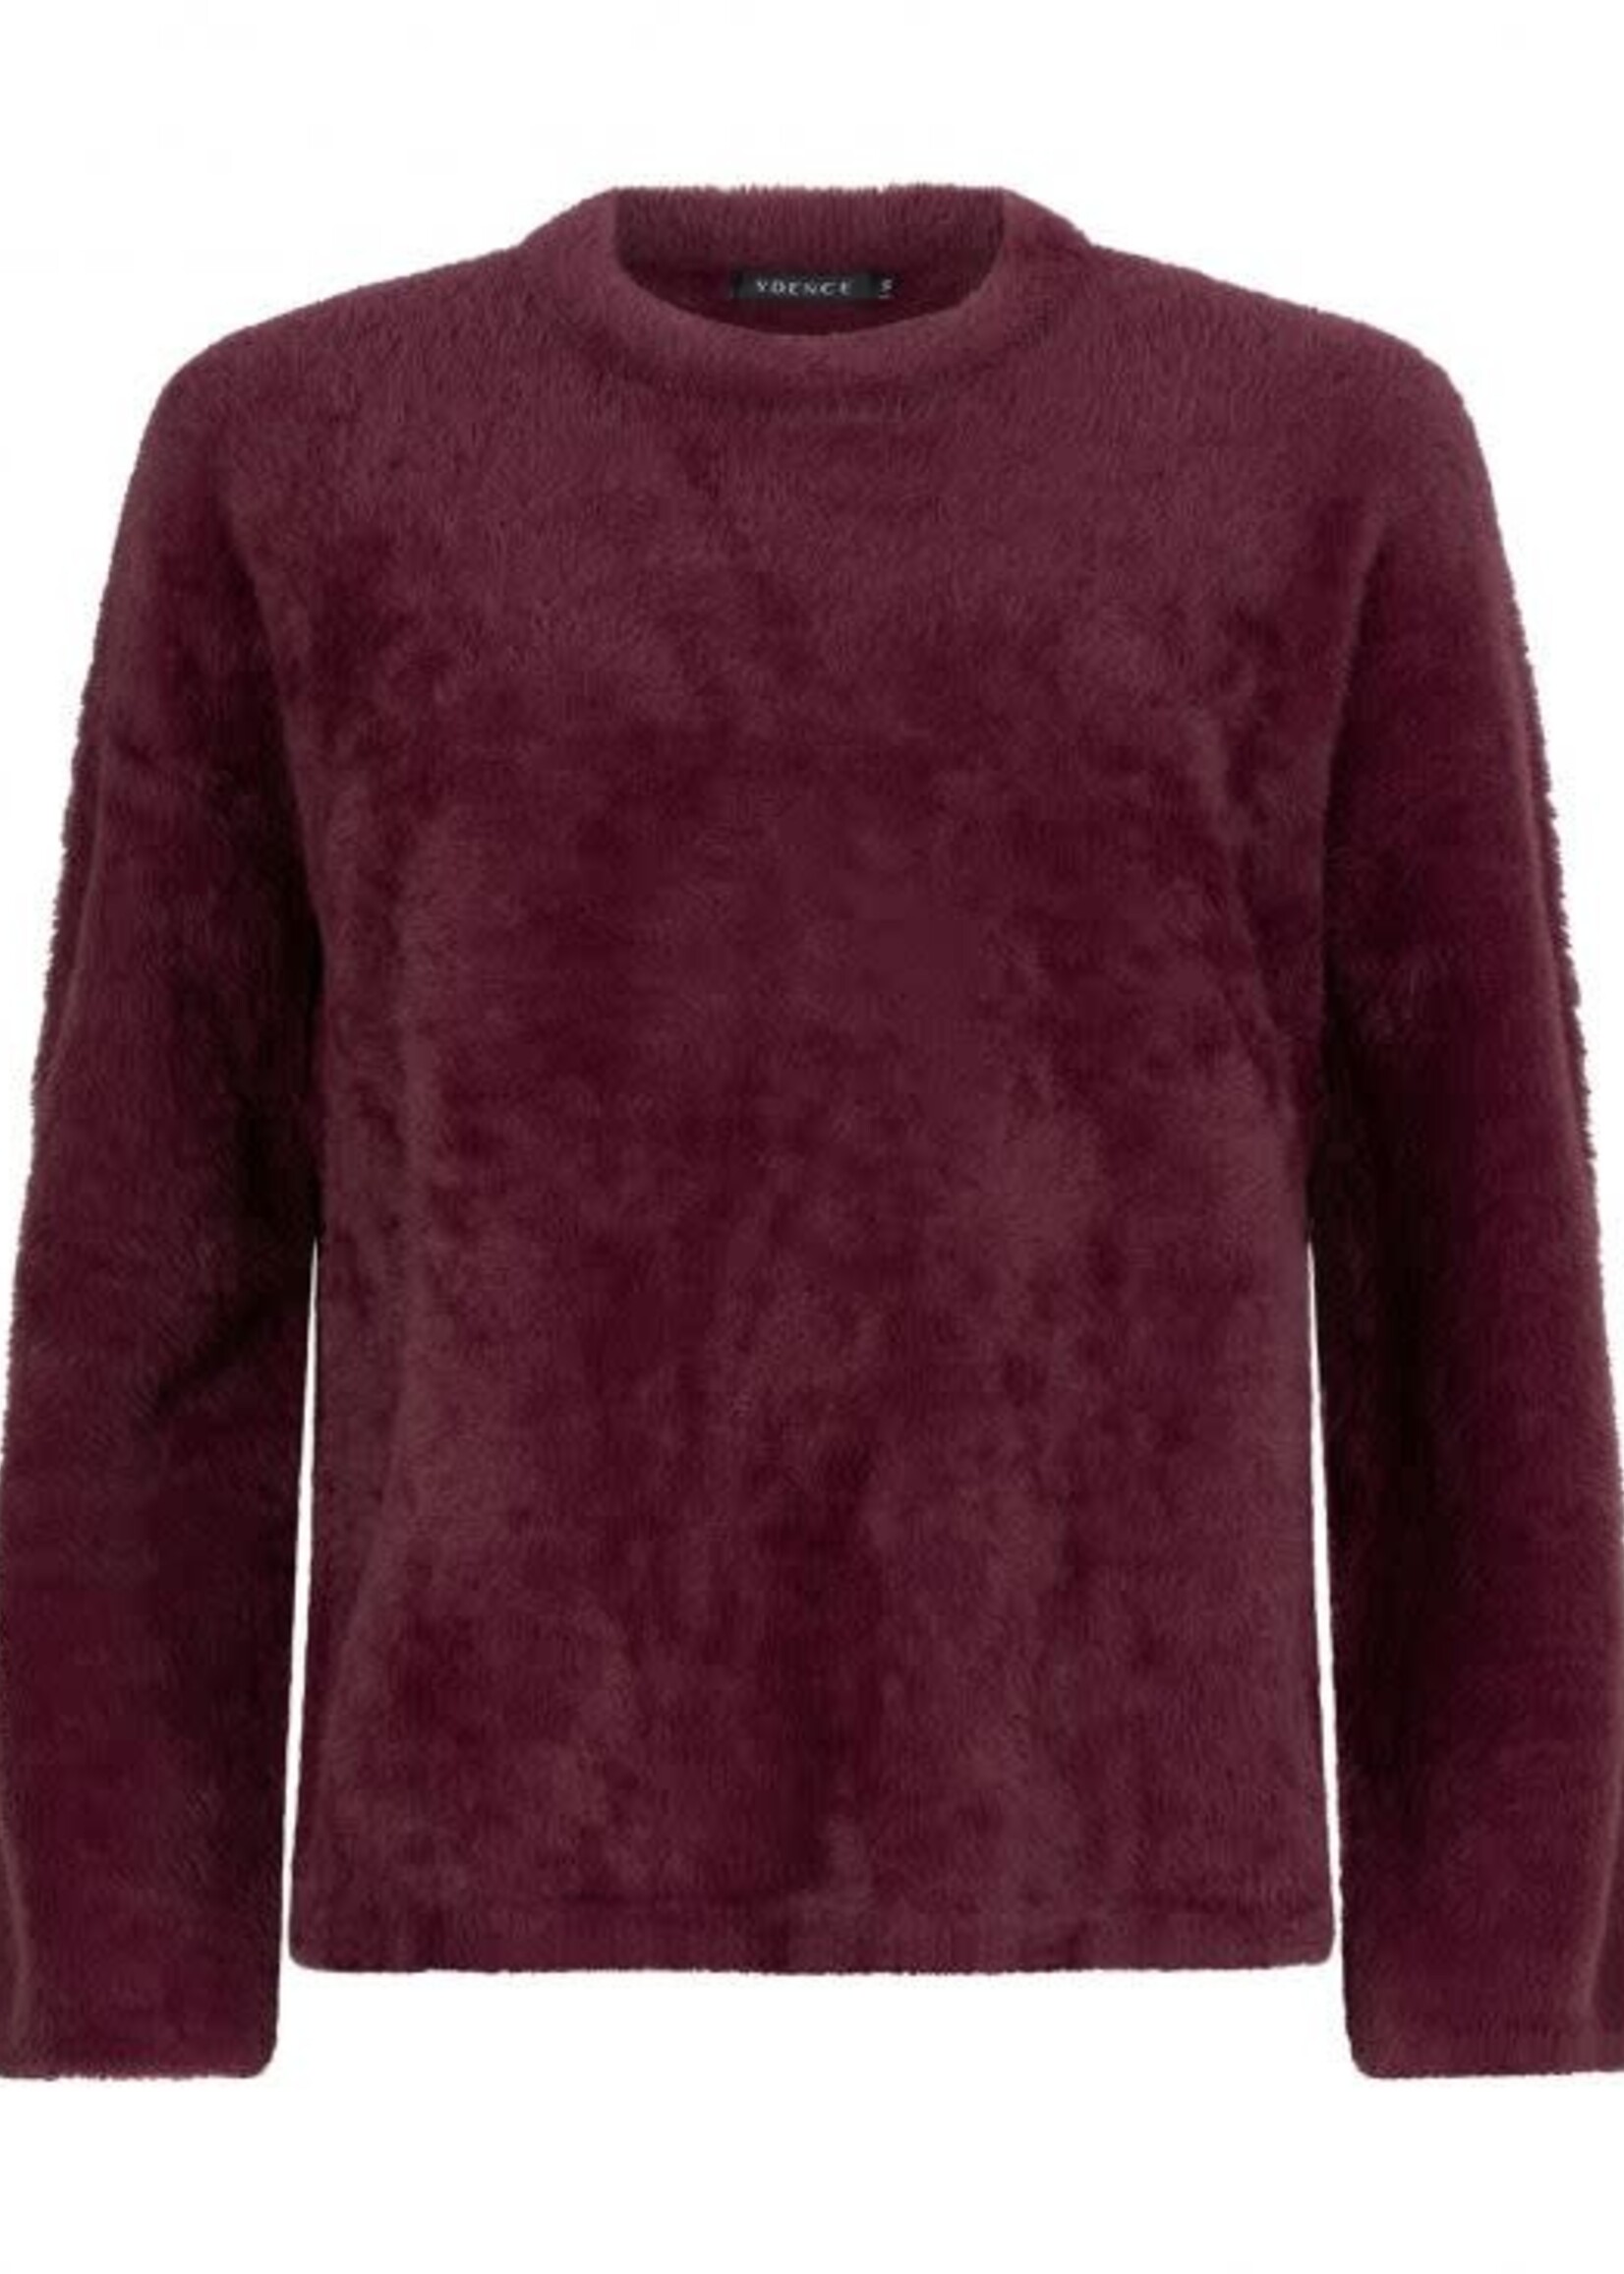 Ydence KNITTED SWEATER Olivia Burgundy